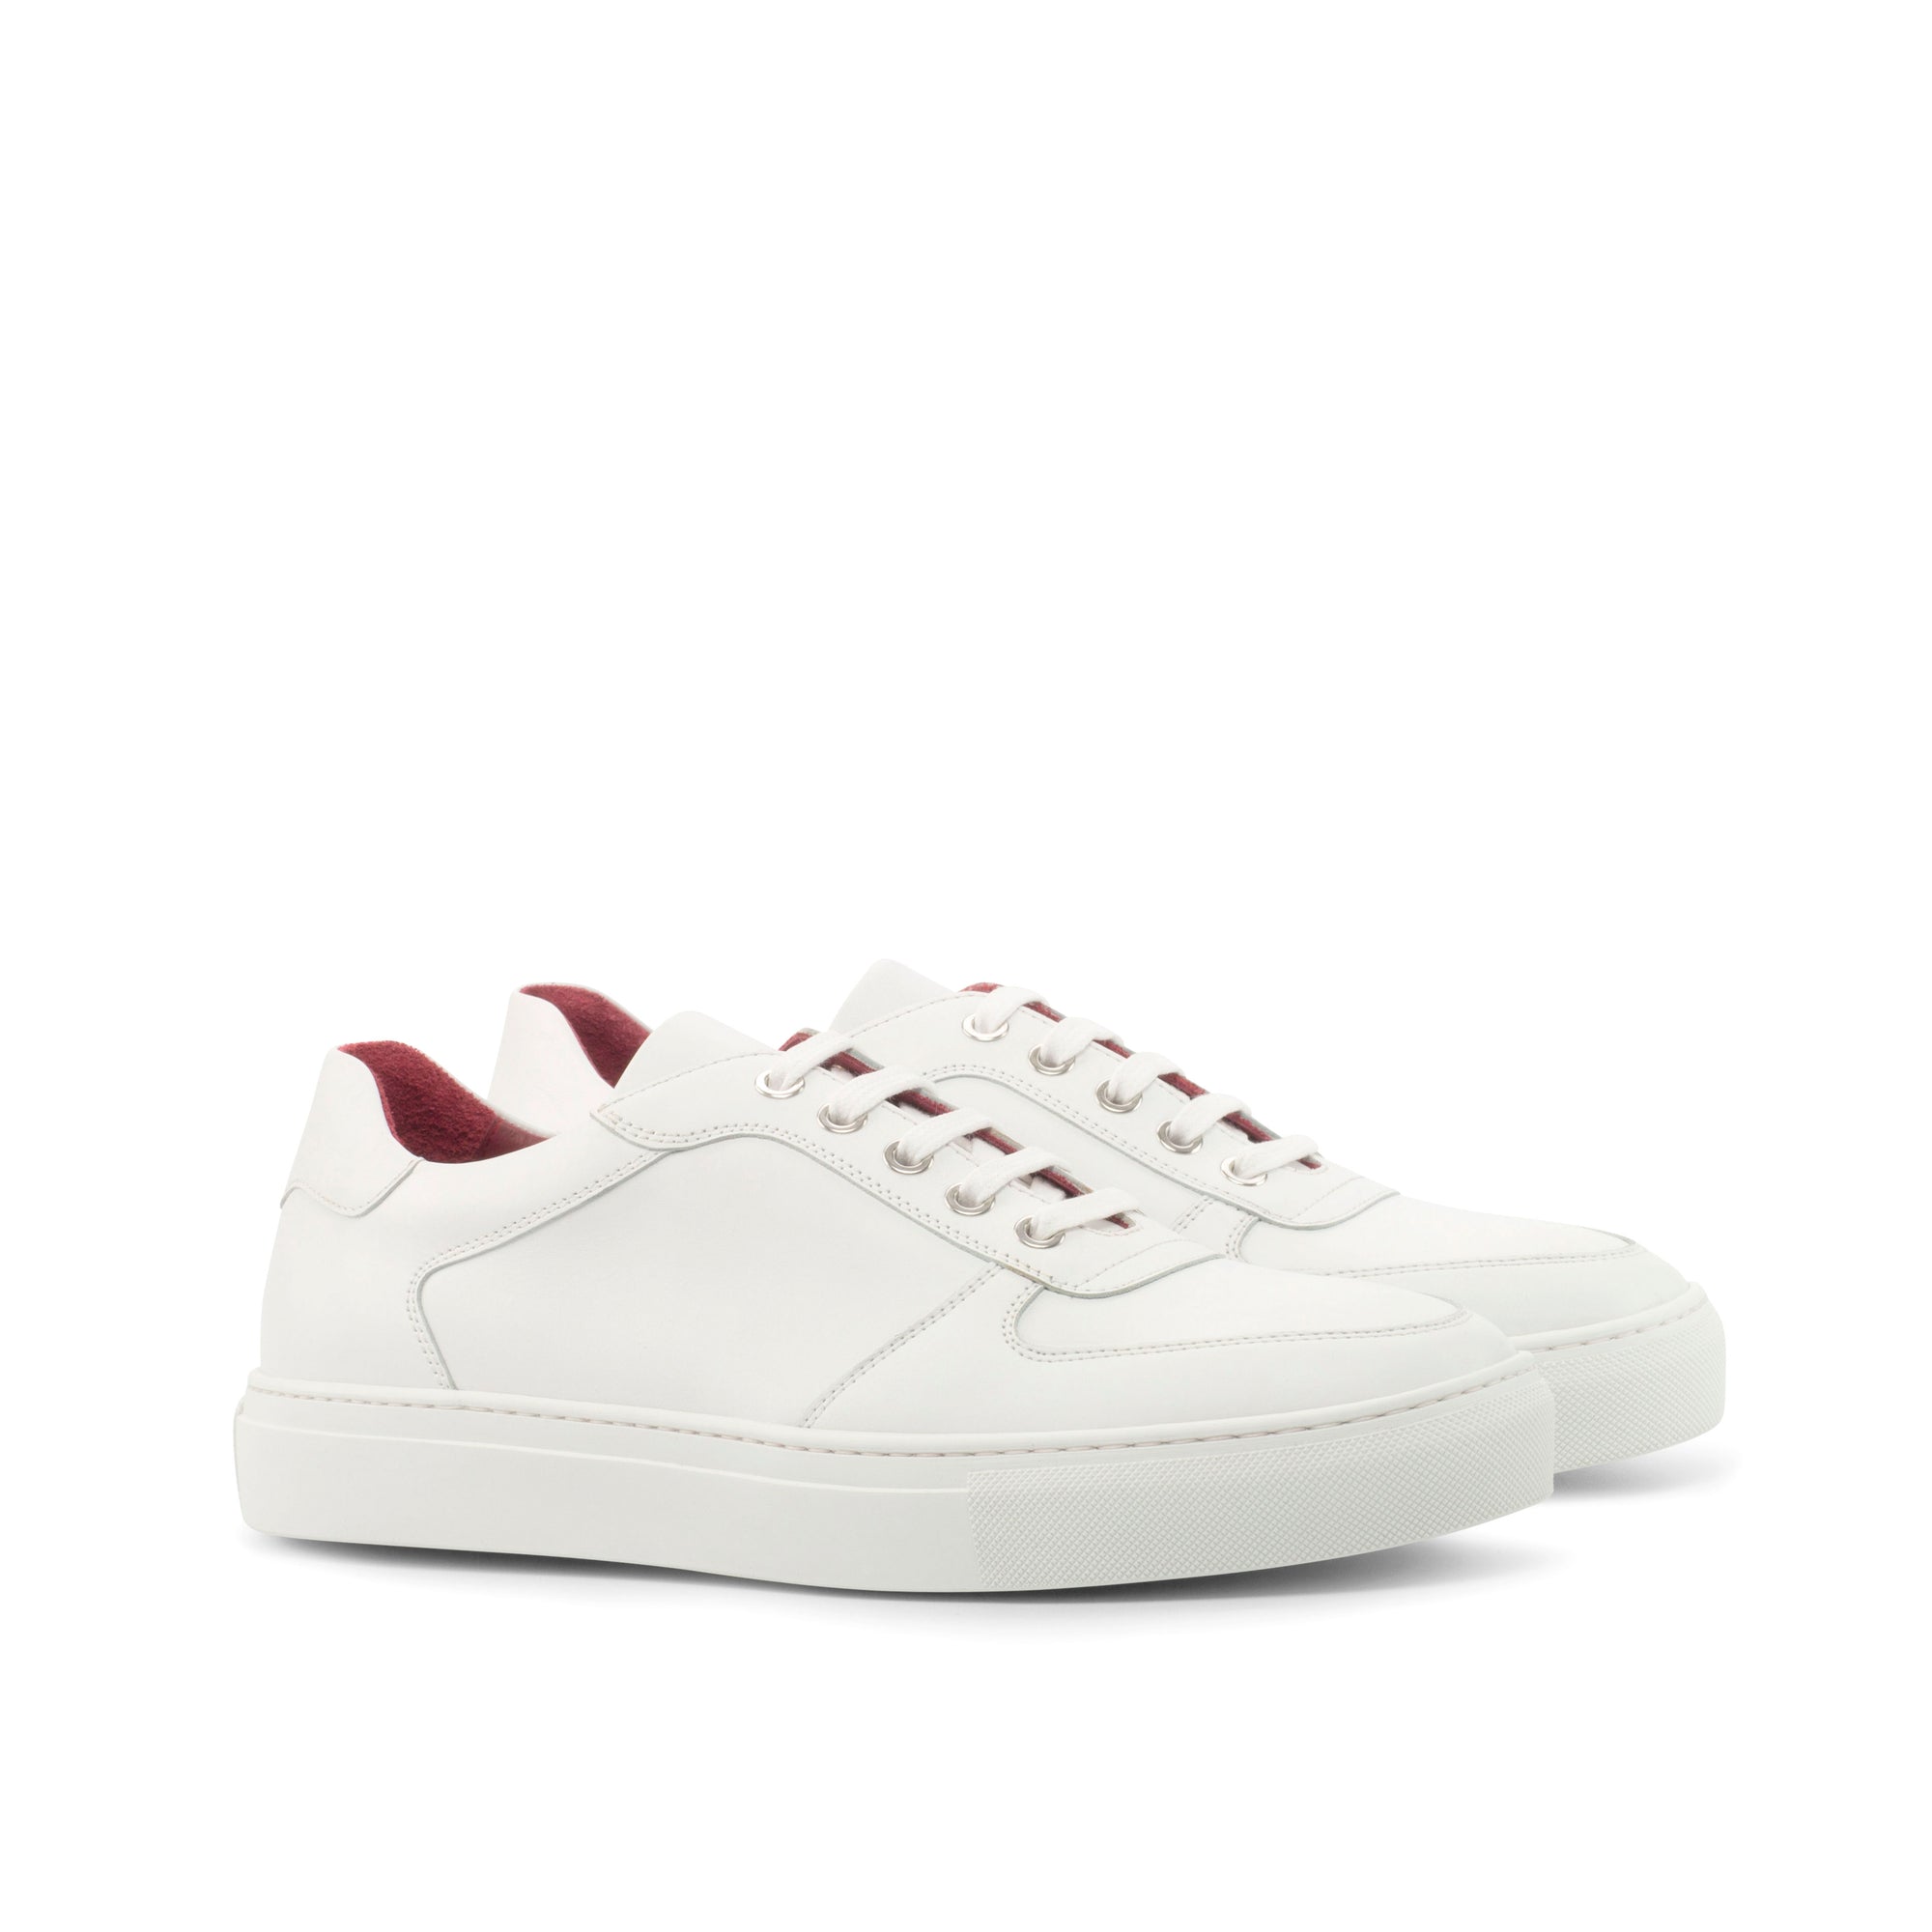 Handmade Sneakers in White Minimalist Leather with Plus Sizes